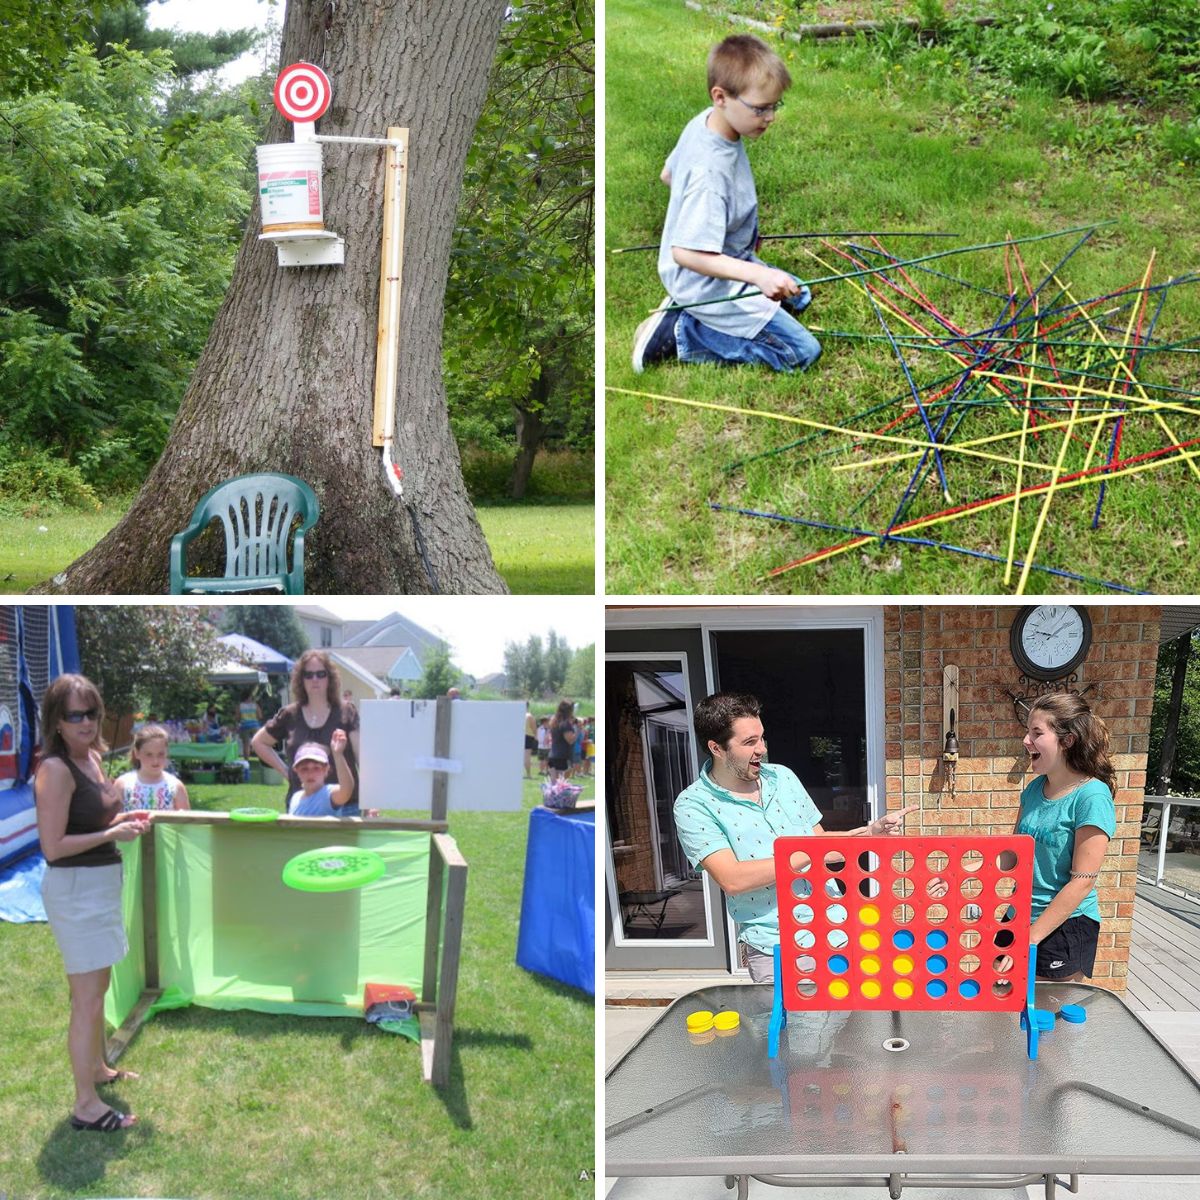 4 images of absolutely coolest backyard games.